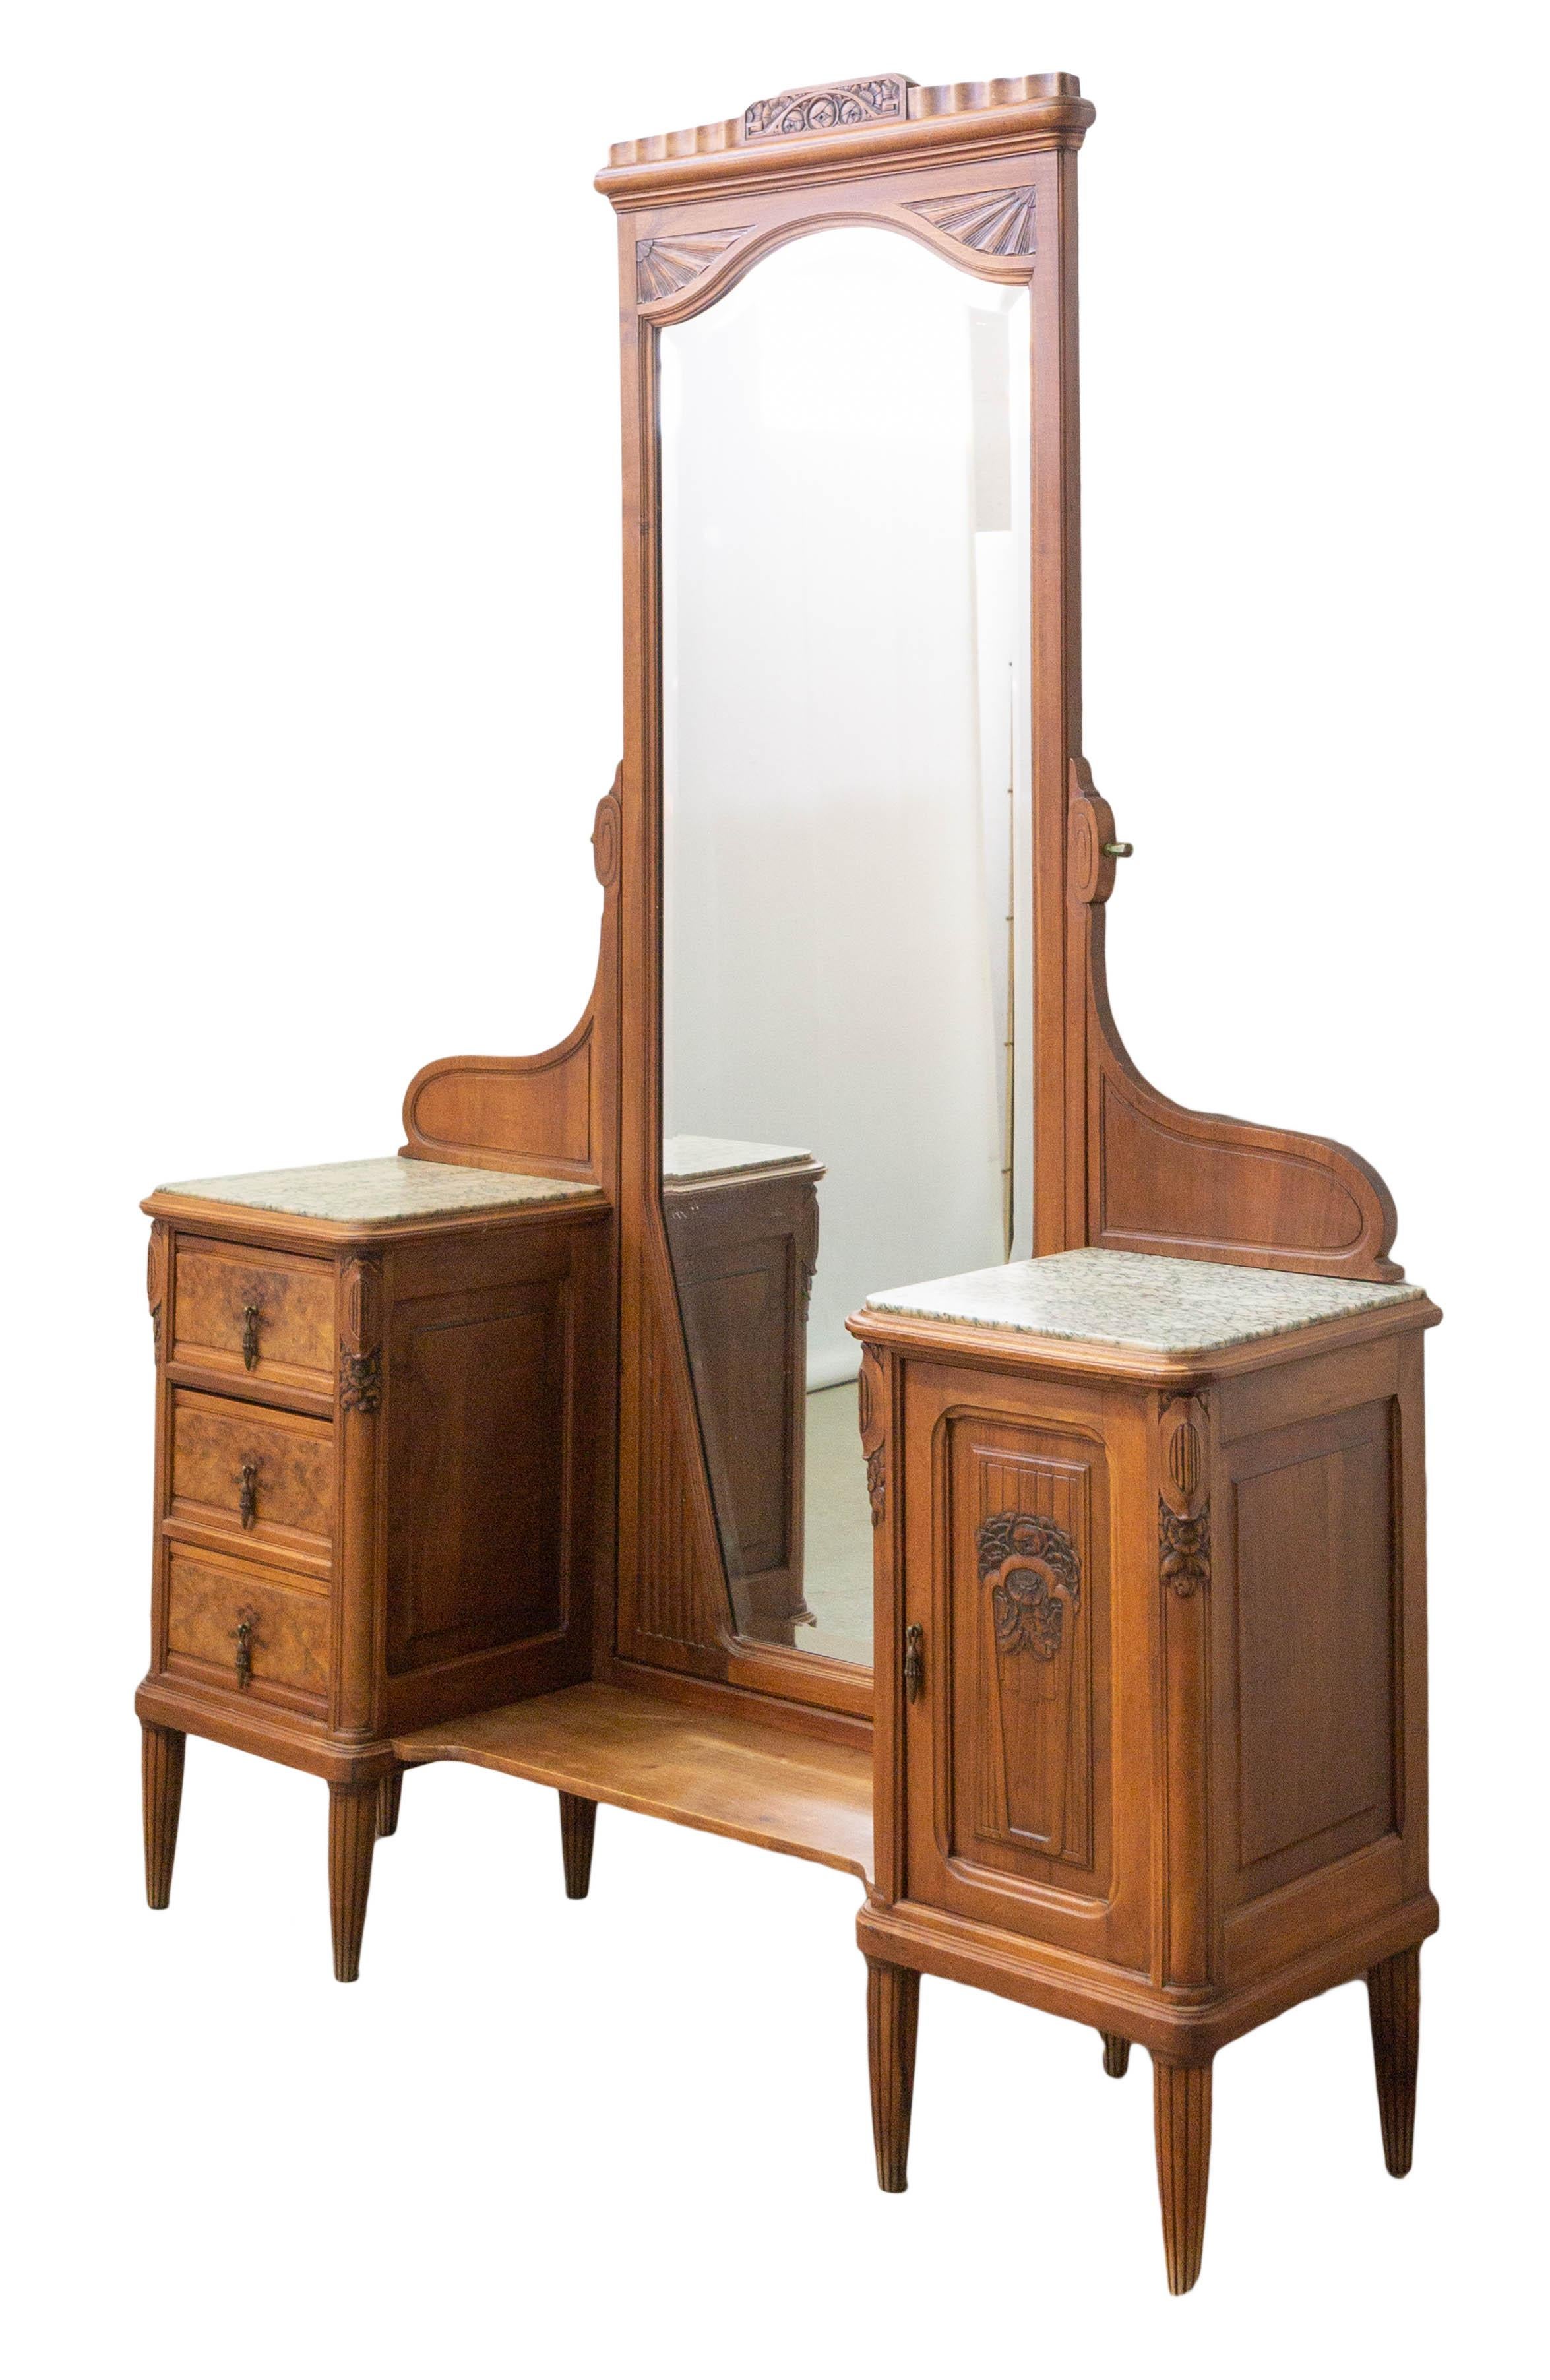 Dressing table with central psyche mirror, circa 1930.
One side table has three drawers and the other one is a cabinet.
Beveled mirror and walnut.
Very good vintage condition.

Shipping:
L 154/P 38/H 176 70 kg.